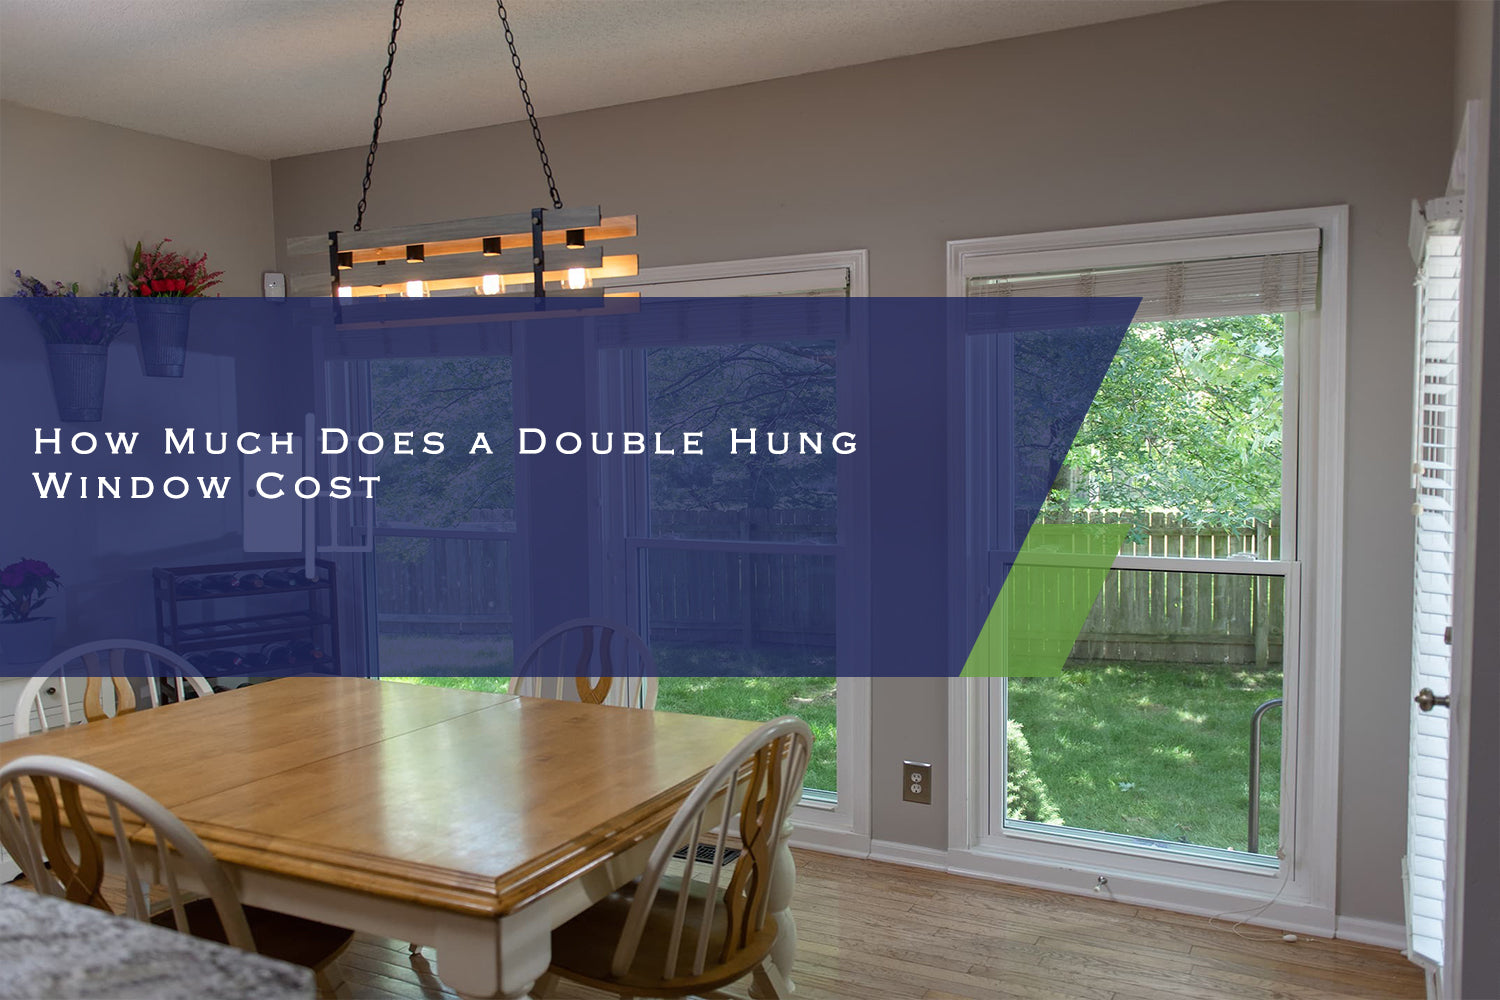 How Much Does a Double Hung Window Cost